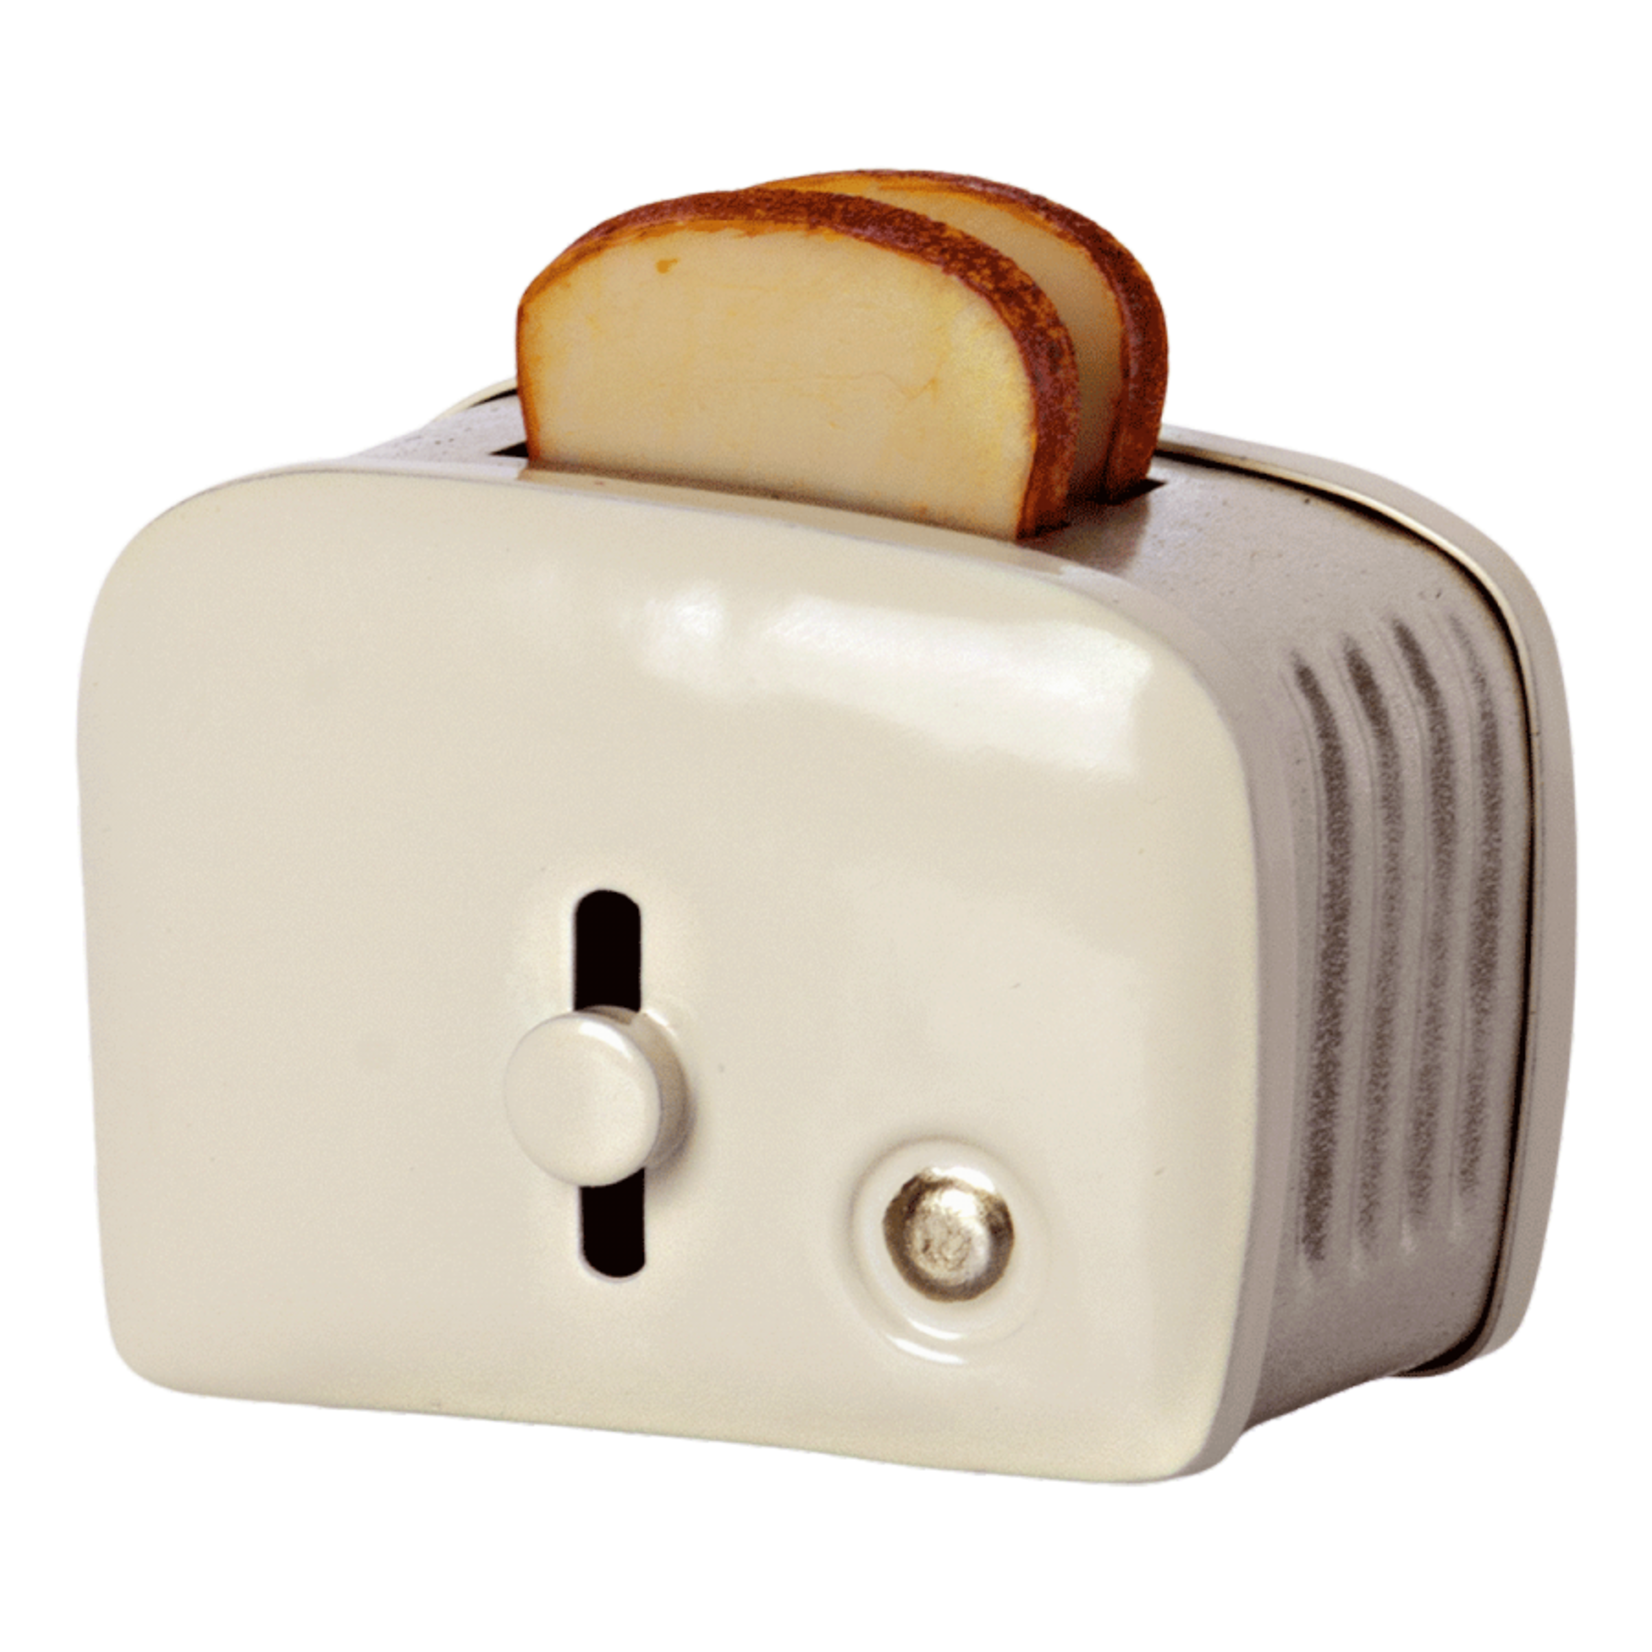 Maileg Maileg off white Miniature toaster and bread (Large)